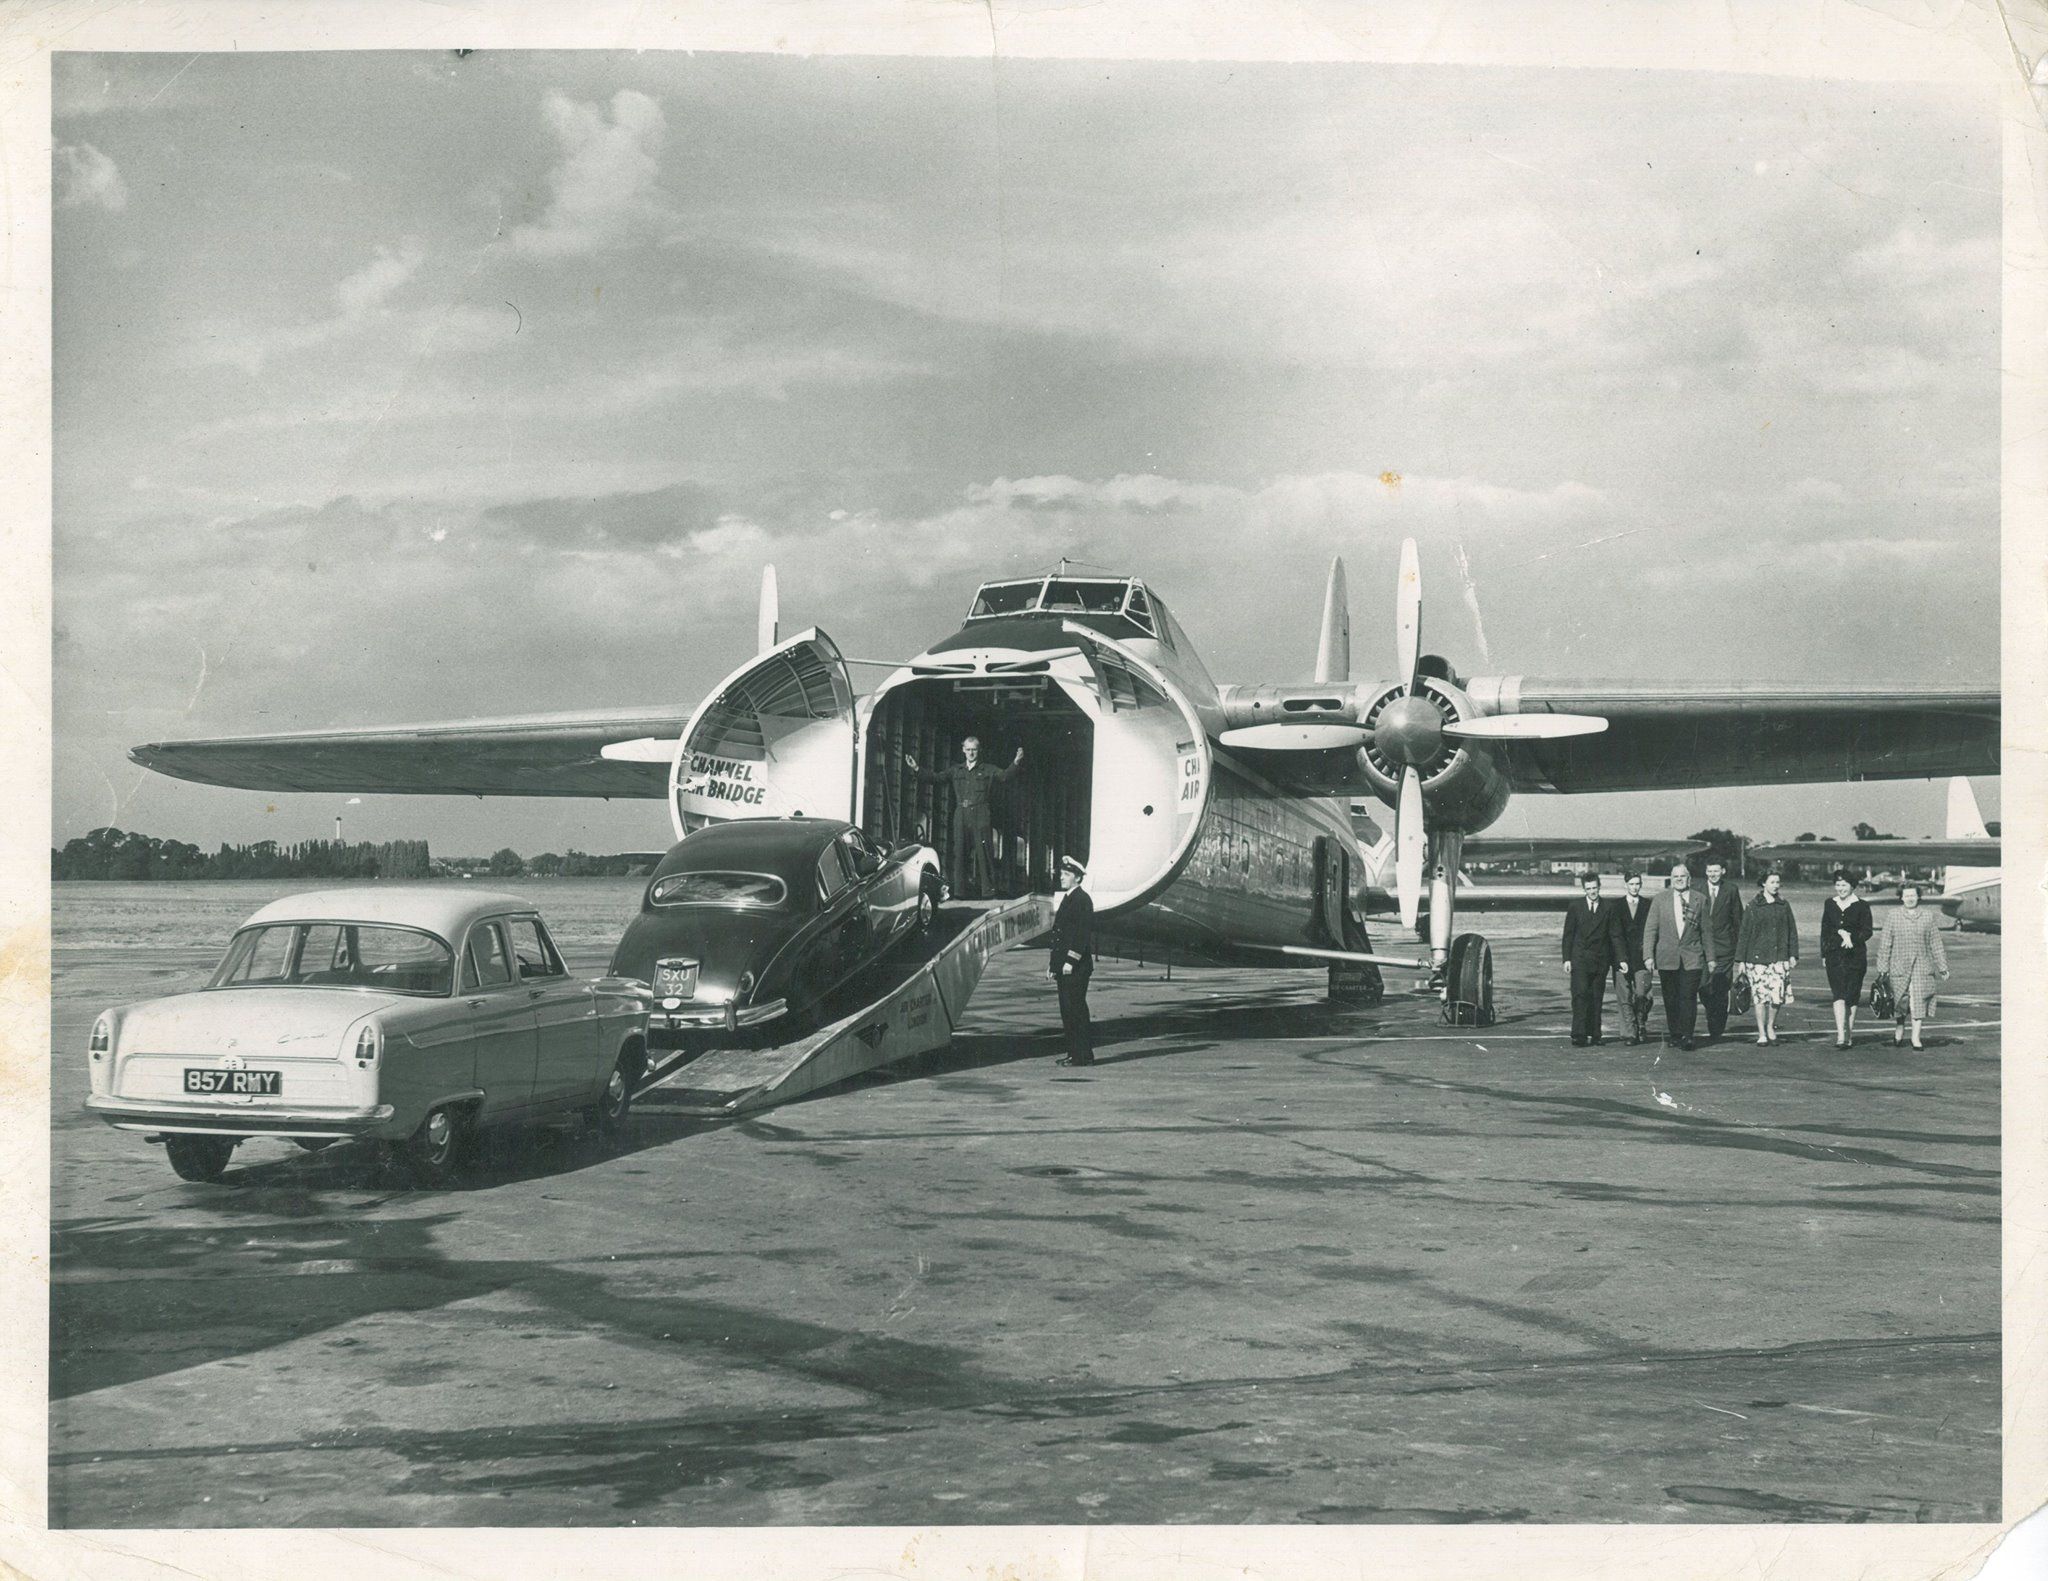 Cars being loaded into a friehgter aircraft.